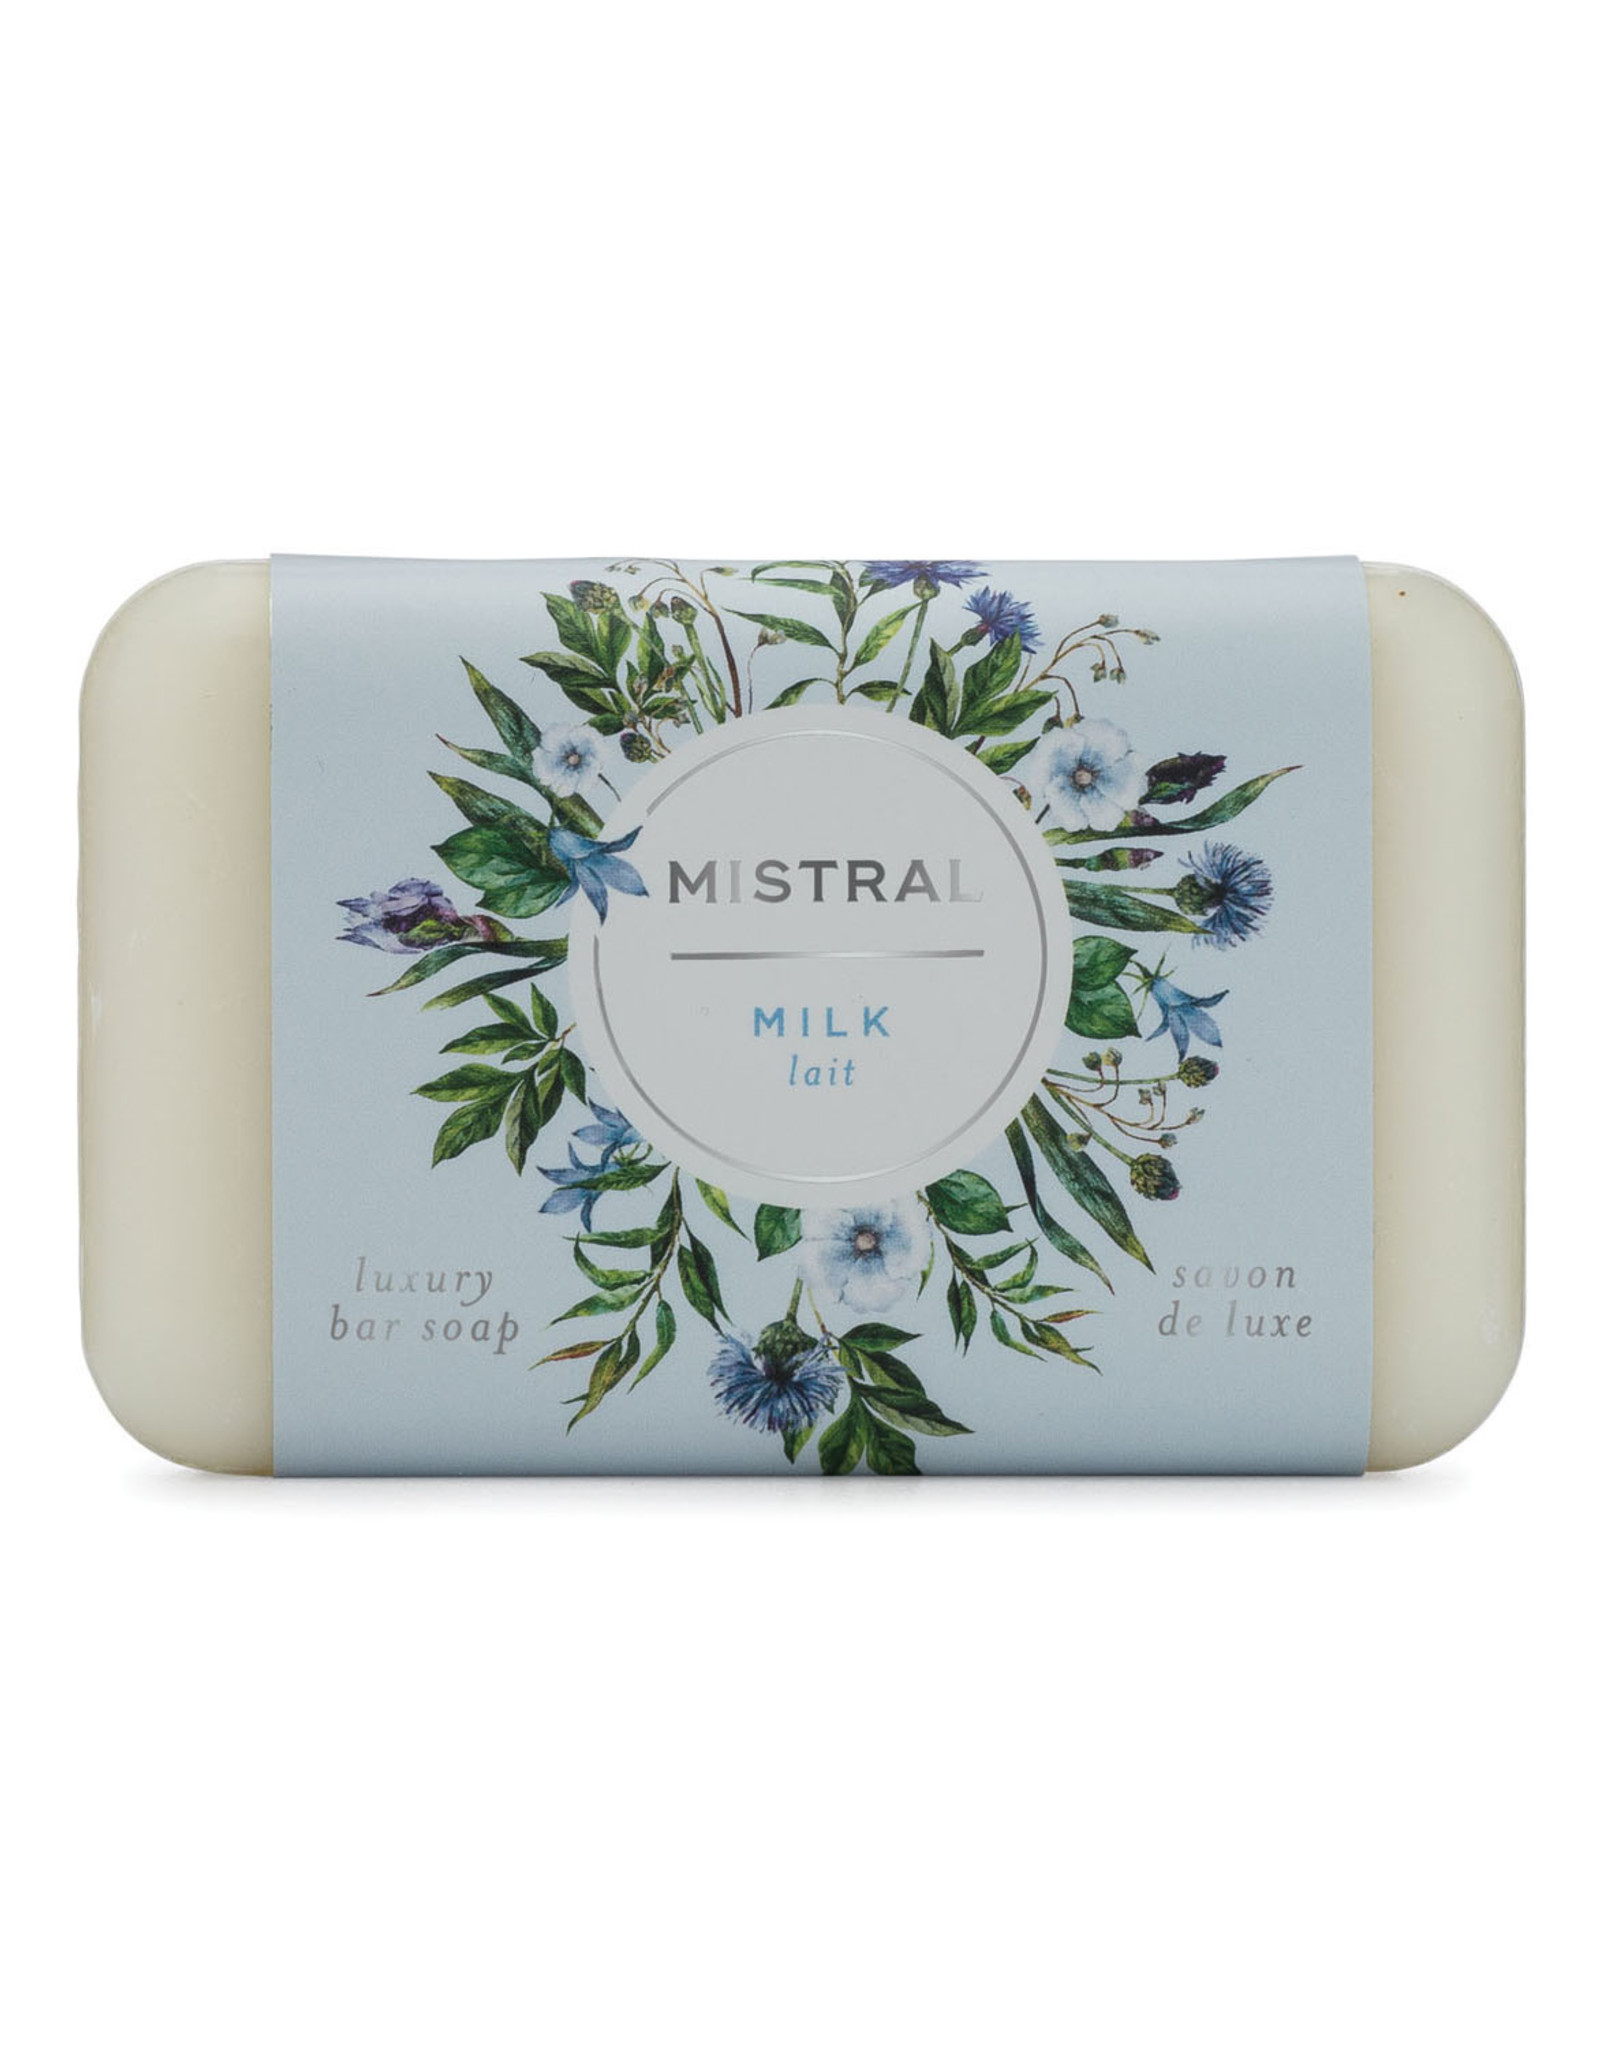 Mistral Classic French Soap Collection - Milk 7 oz